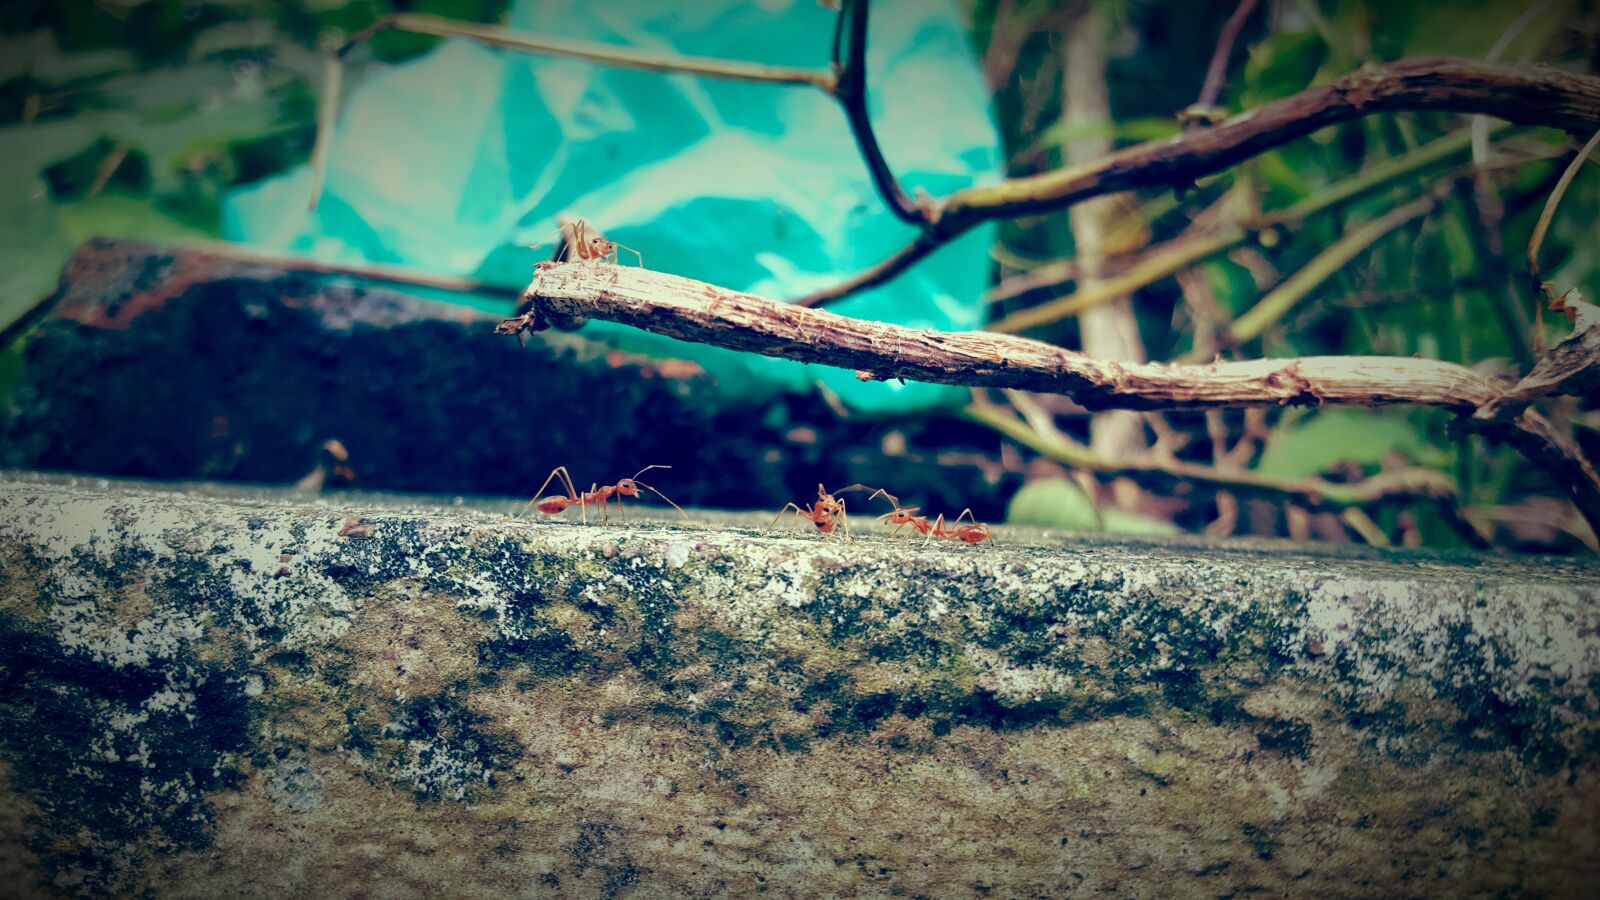 Samsung Galaxy S6 sample photo. Ant on wall, green photography